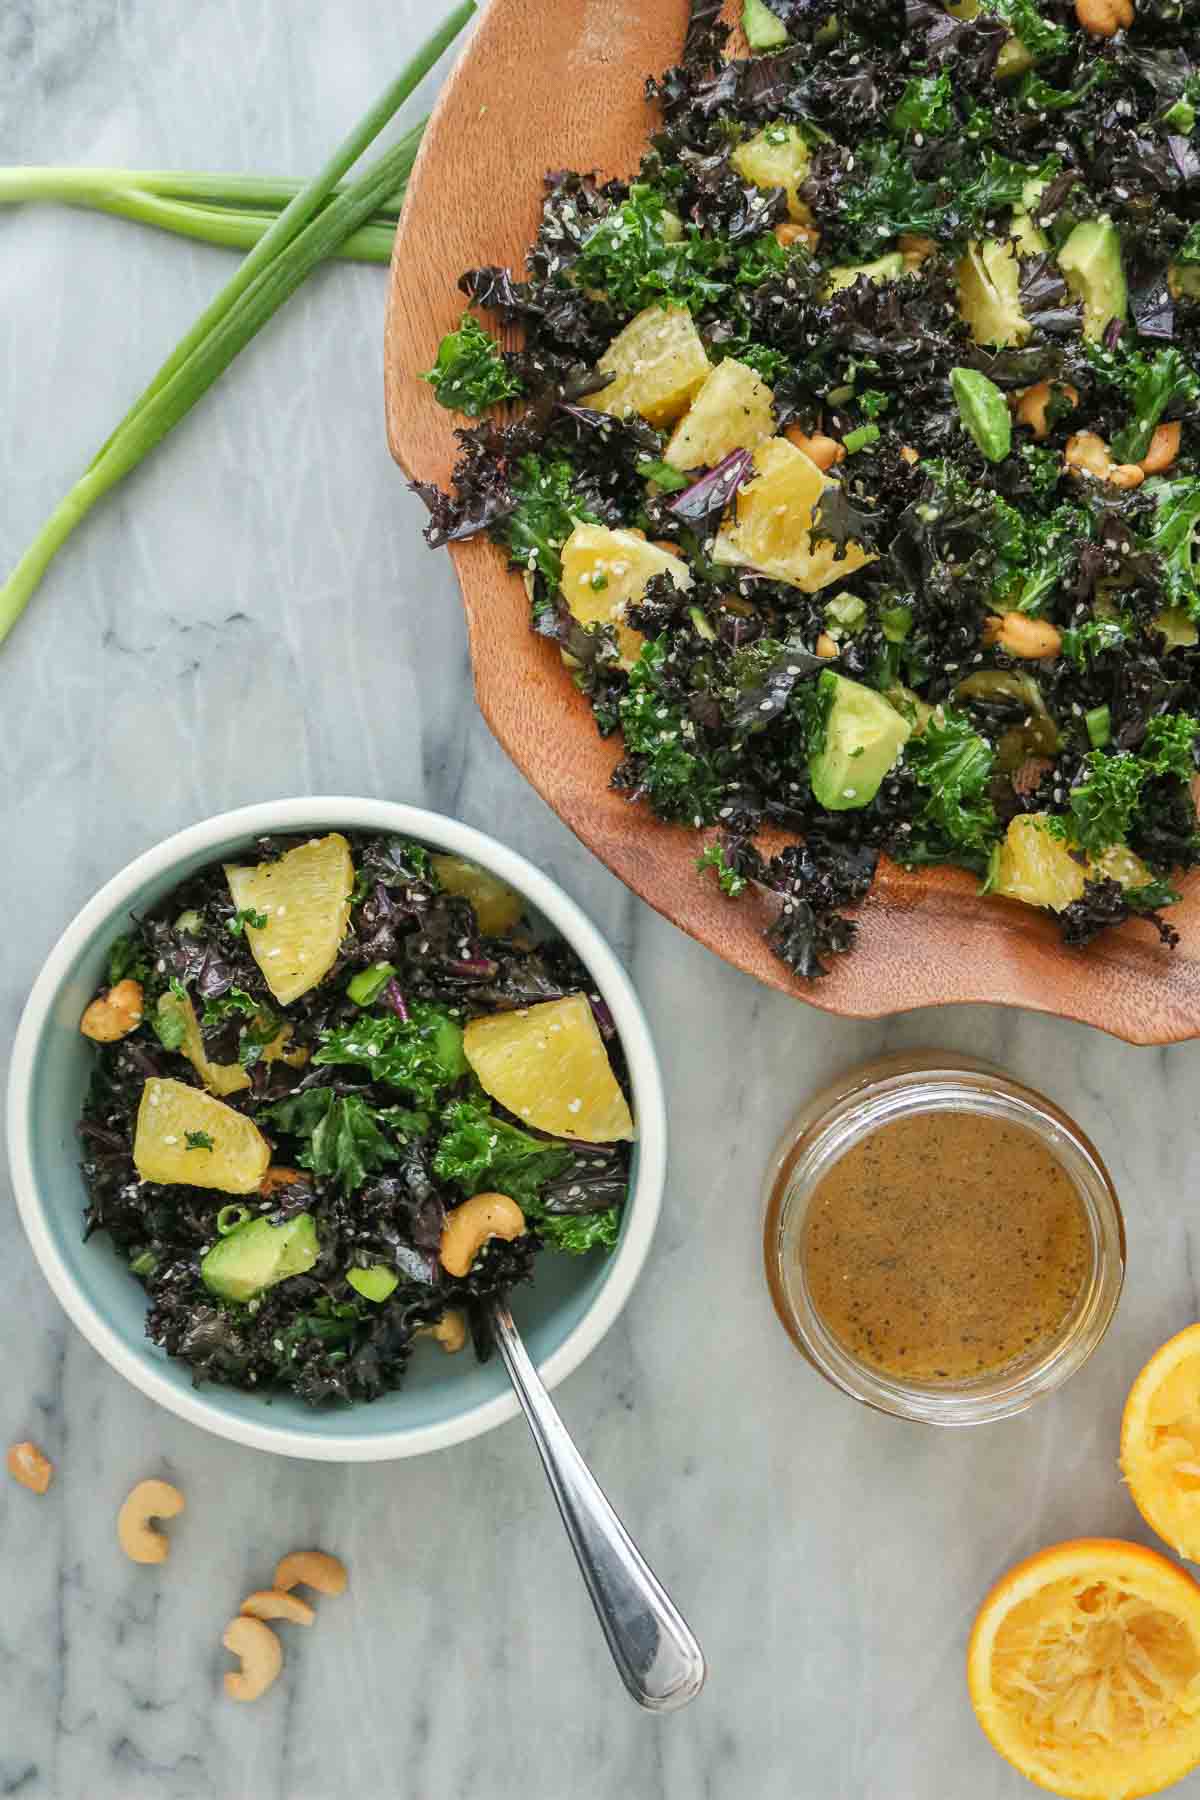 Citrus kale salad, a portion in a small bowl and some in a wooden serving bowl.